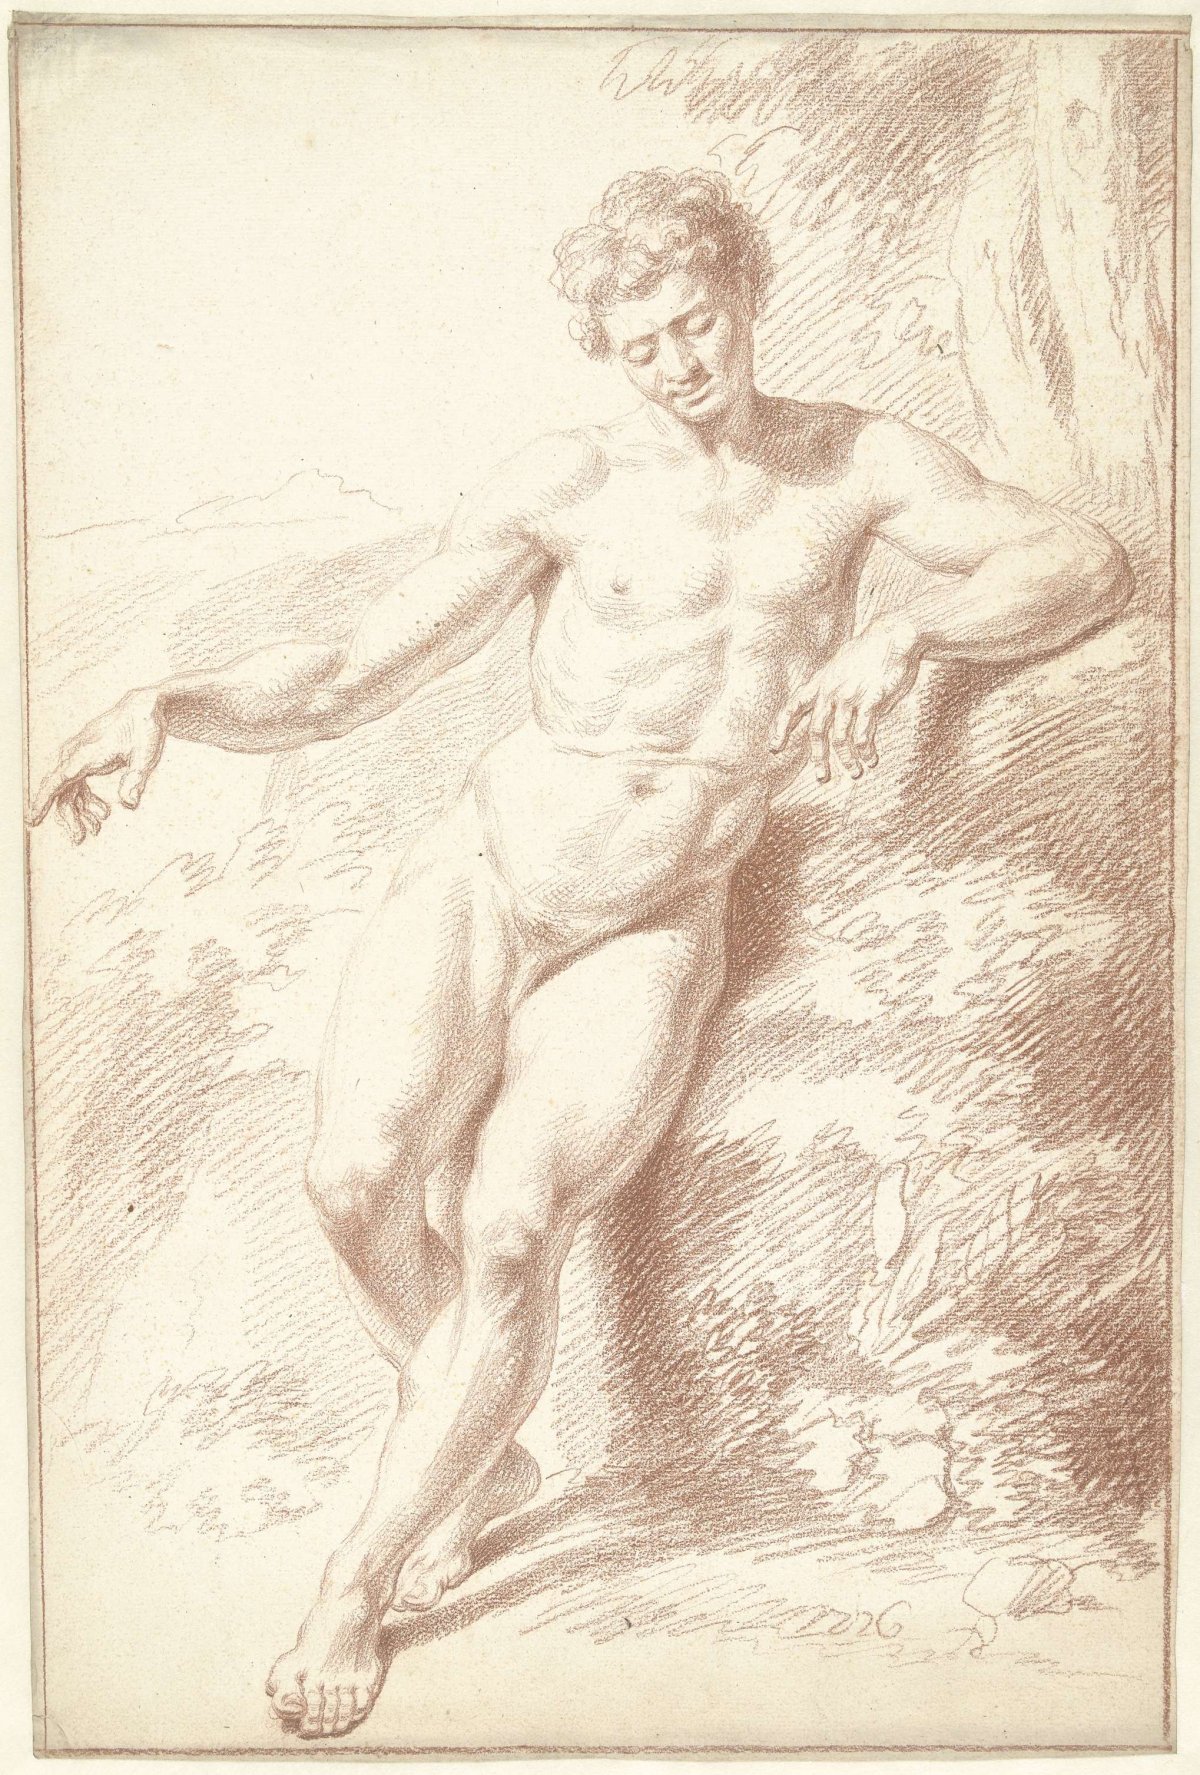 Male nude, standing, leaning on left arm, Louis Fabritius Dubourg, 1726